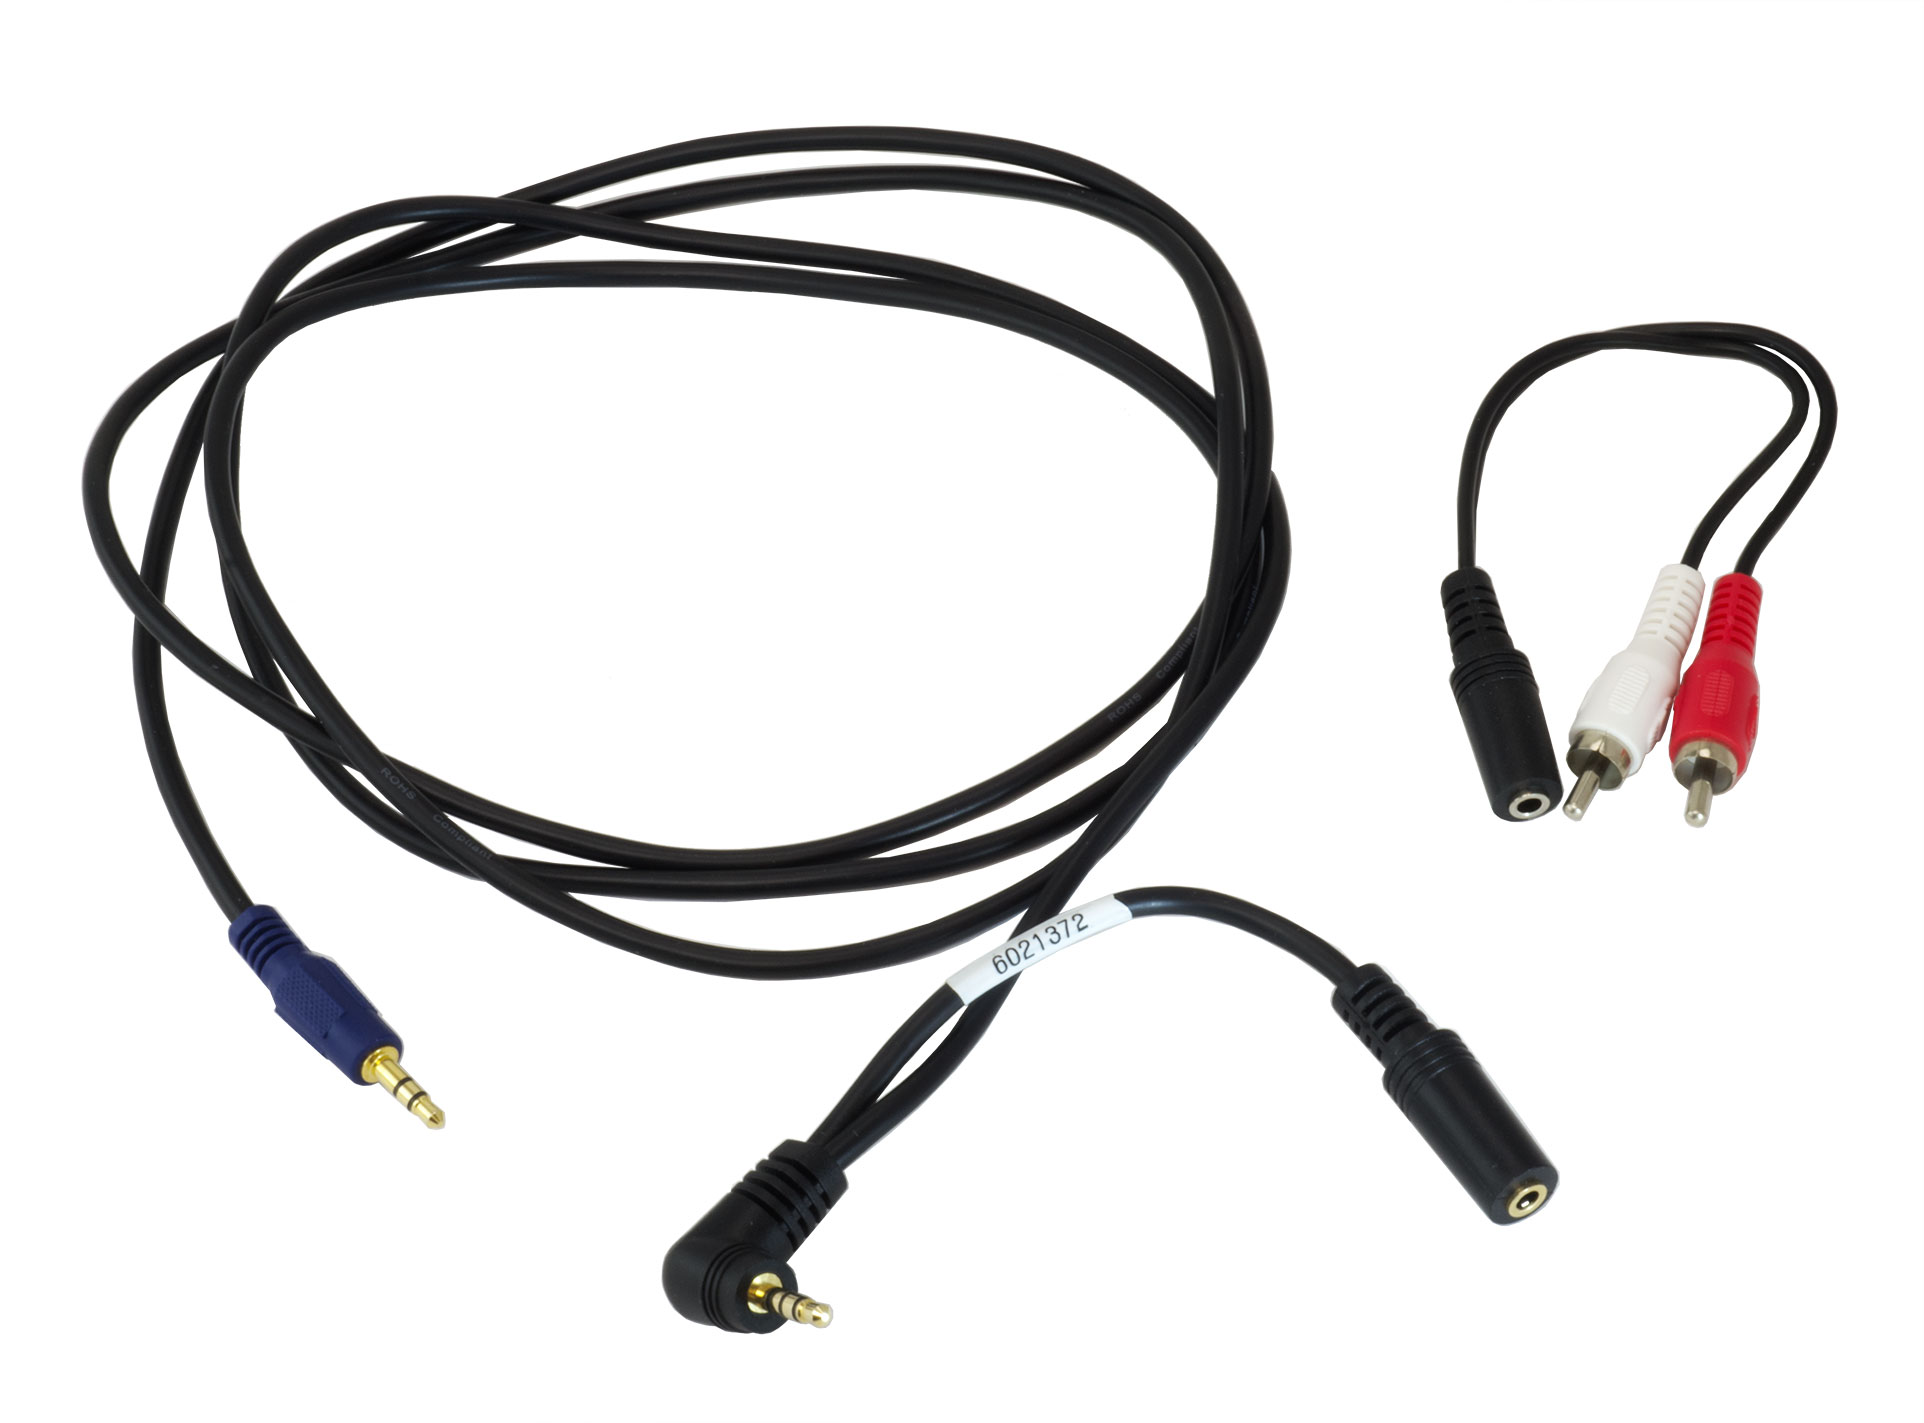 Hauppauge Support Chat Cable